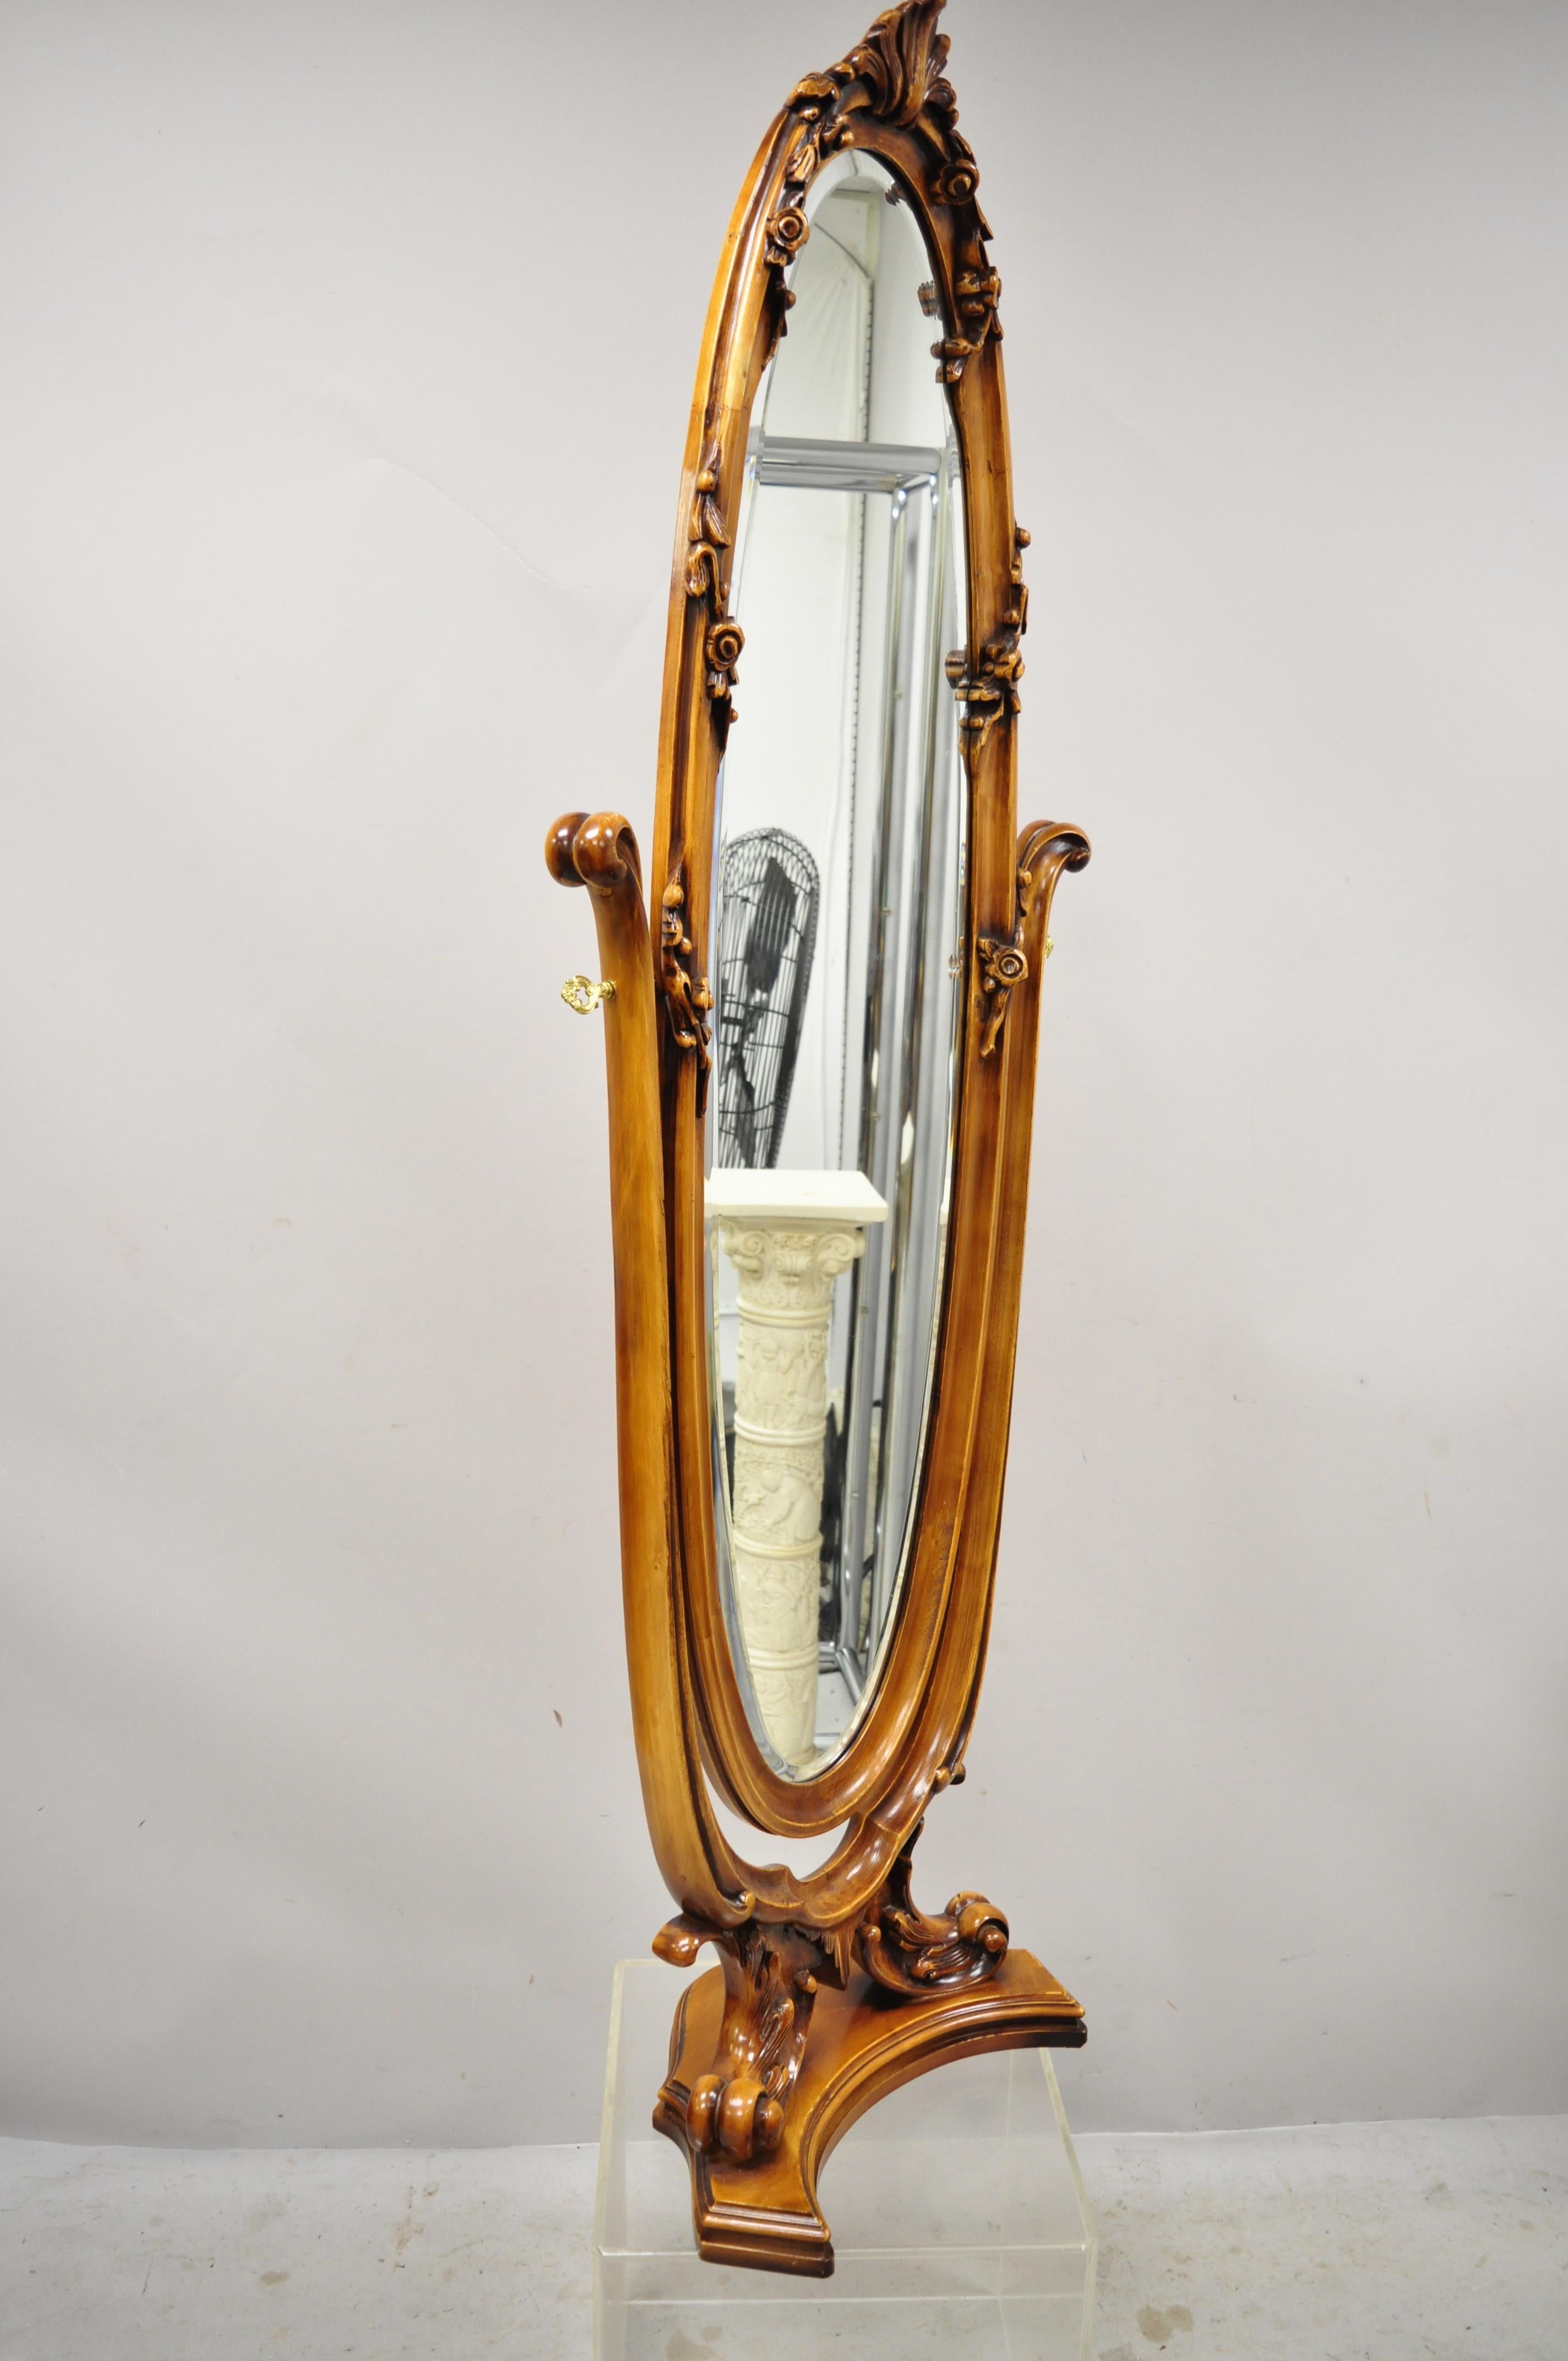 Reproduction French Victorian style carved wood oval beveled glass standing floor dressing cheval mirror. Item features nice mid-size cheval mirror, solid wood frame, beautiful wood grain, nicely carved details, oval beveled glass, great style and